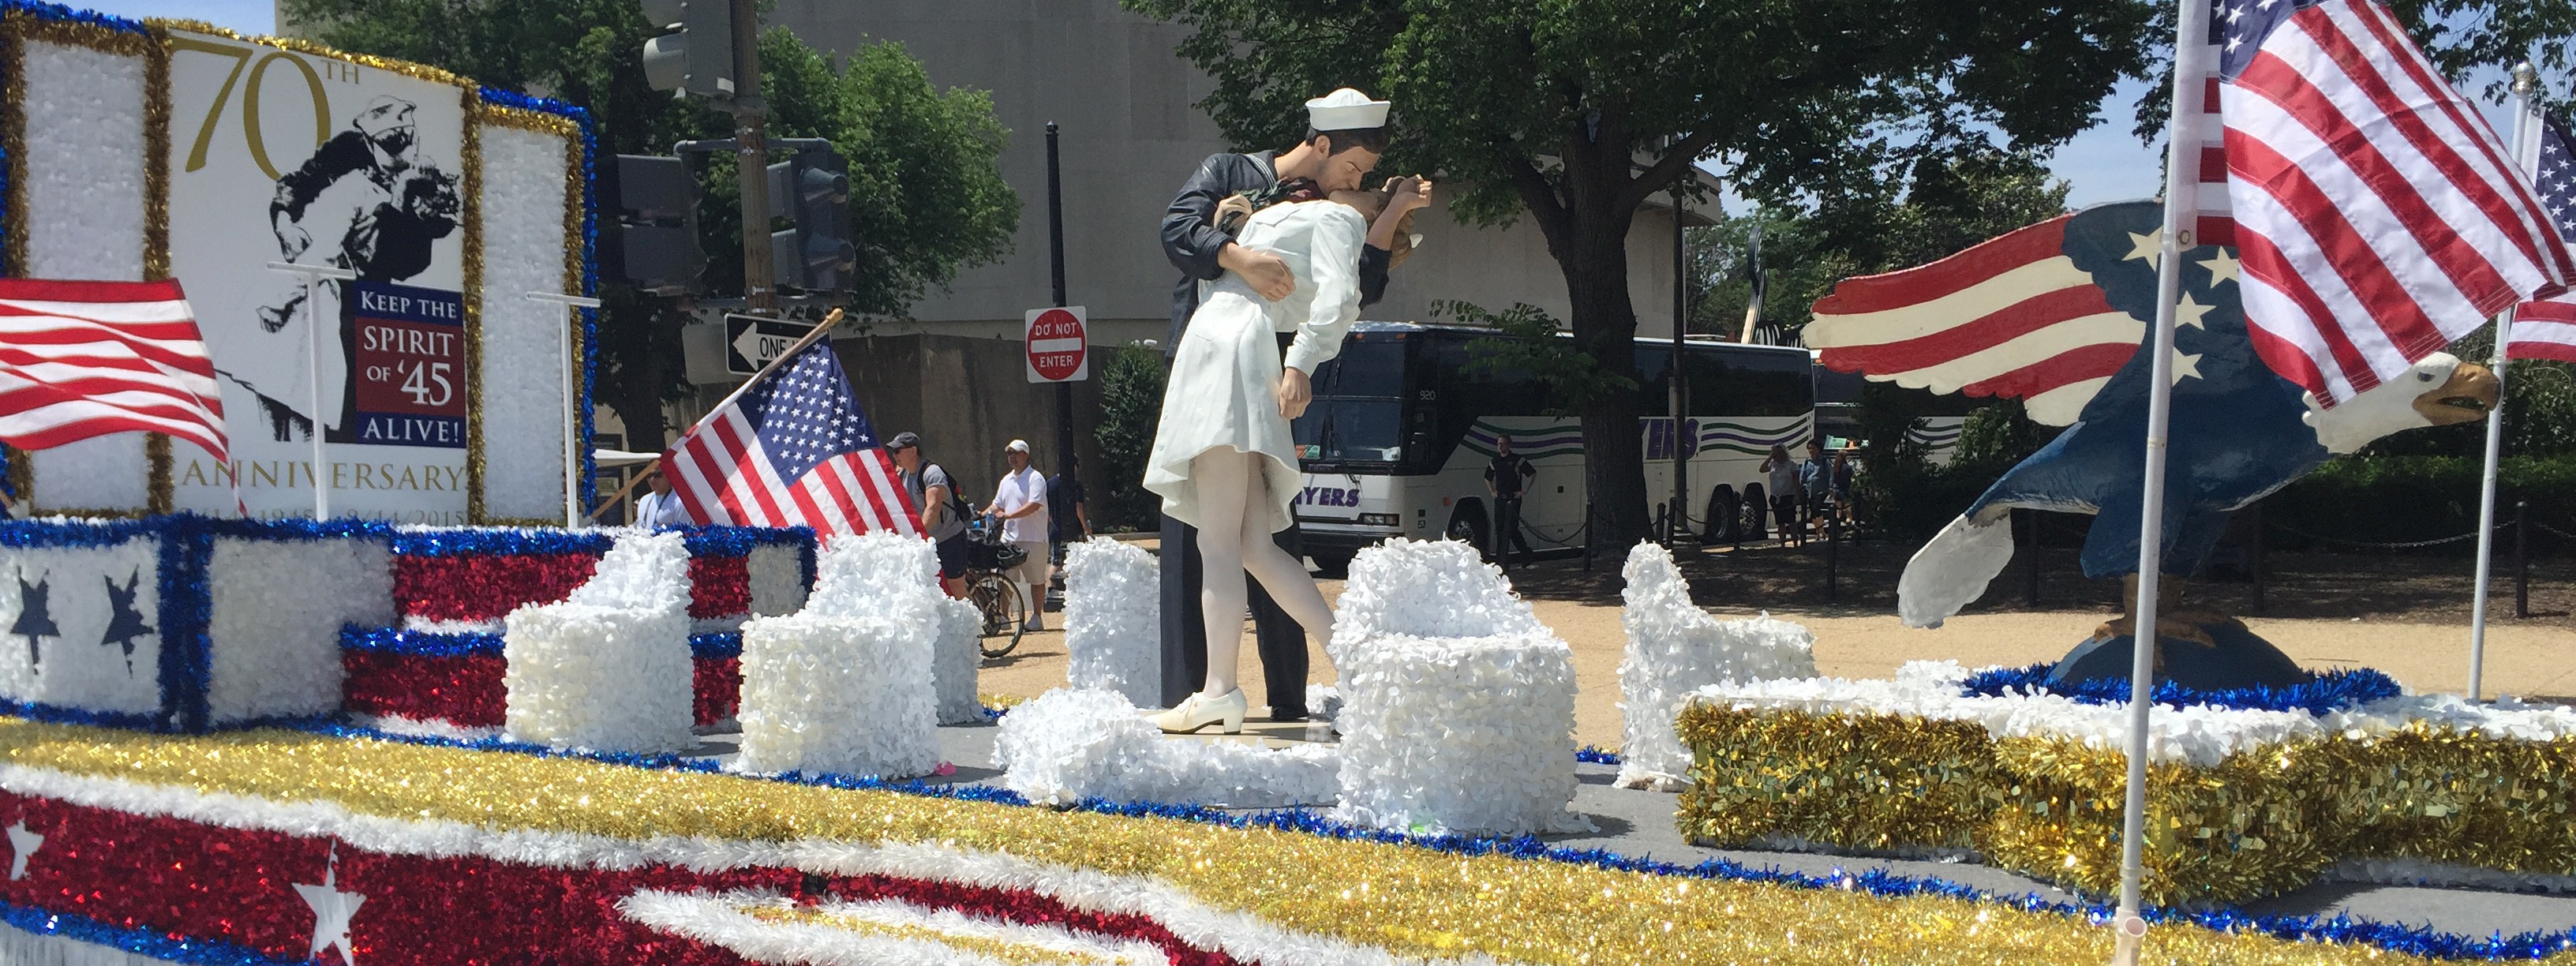 U-Haul Helps Keep the Spirit of ’45 Alive with Memorial Day Float